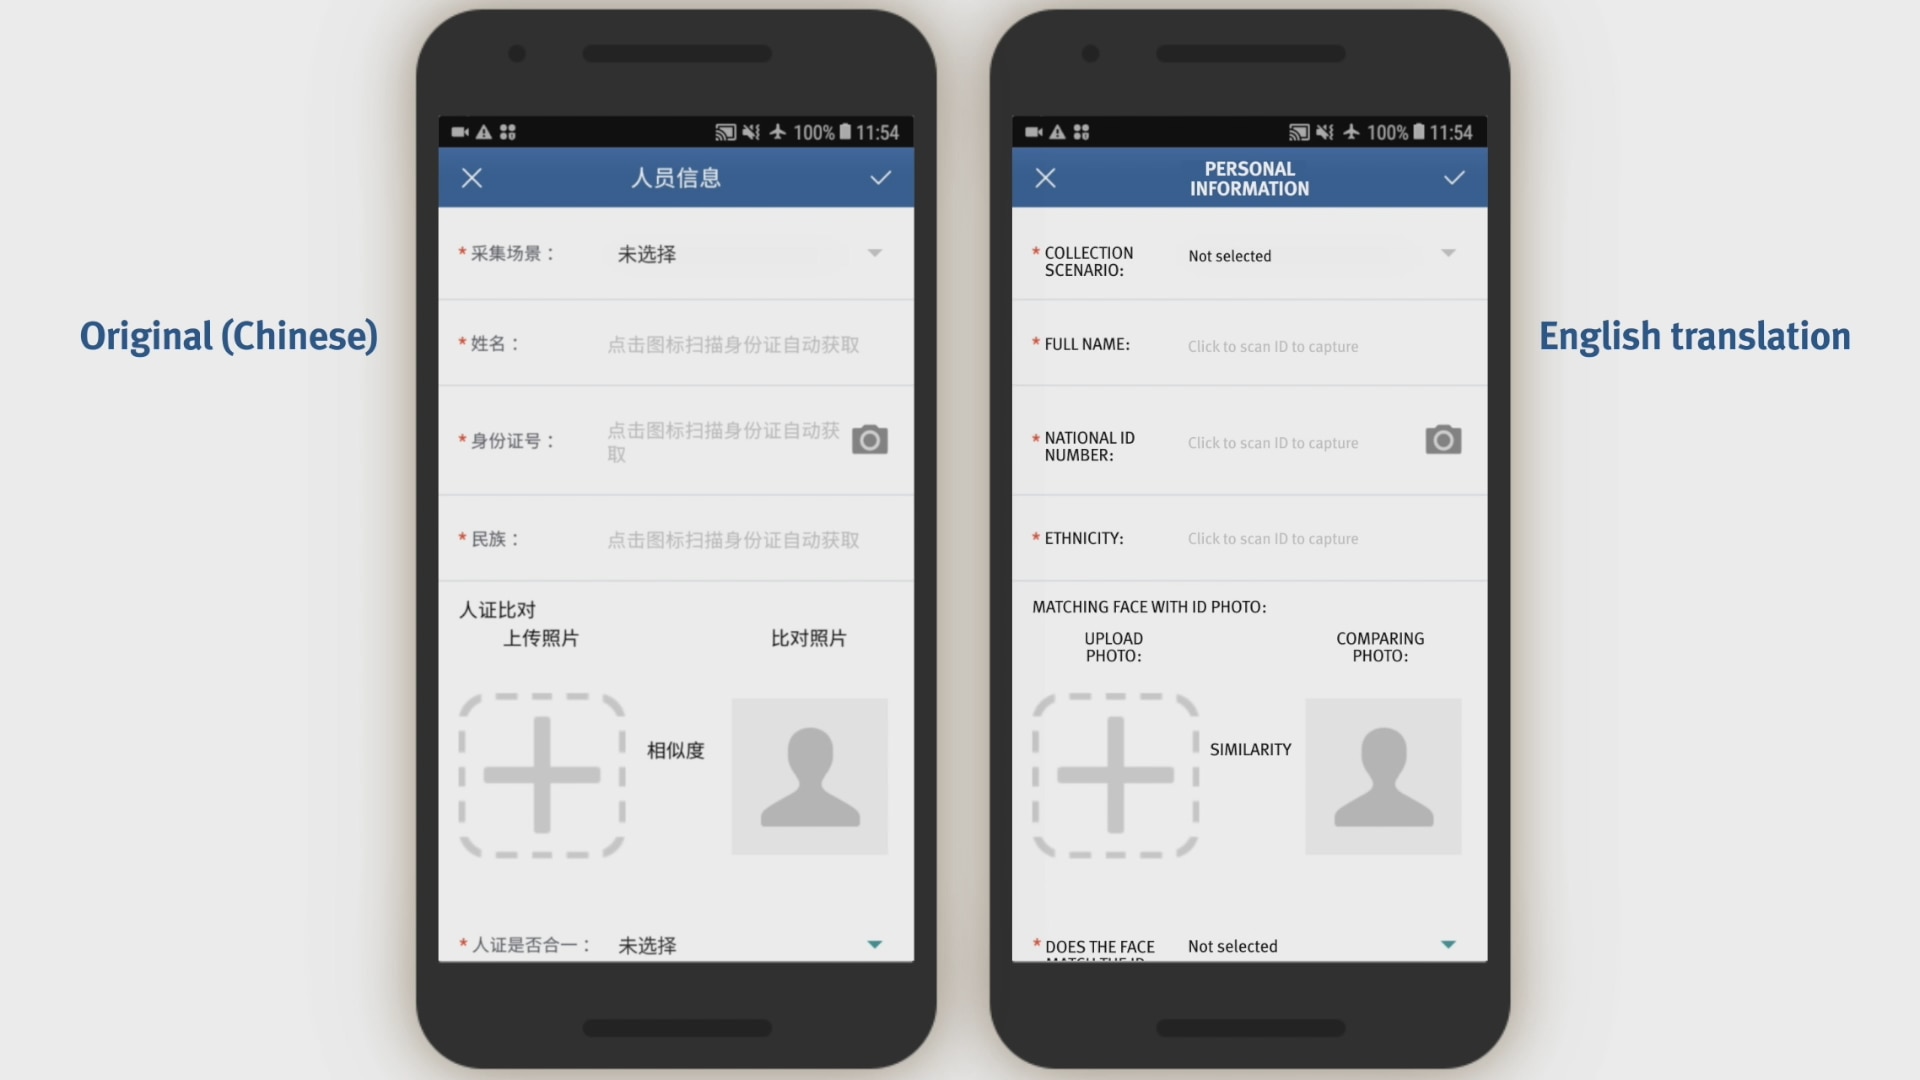 Authorities are using a mobile app to carry out mass surveillance and arbitrary detention of Muslims in Chinaâs western Xinjiang region according to HRW.